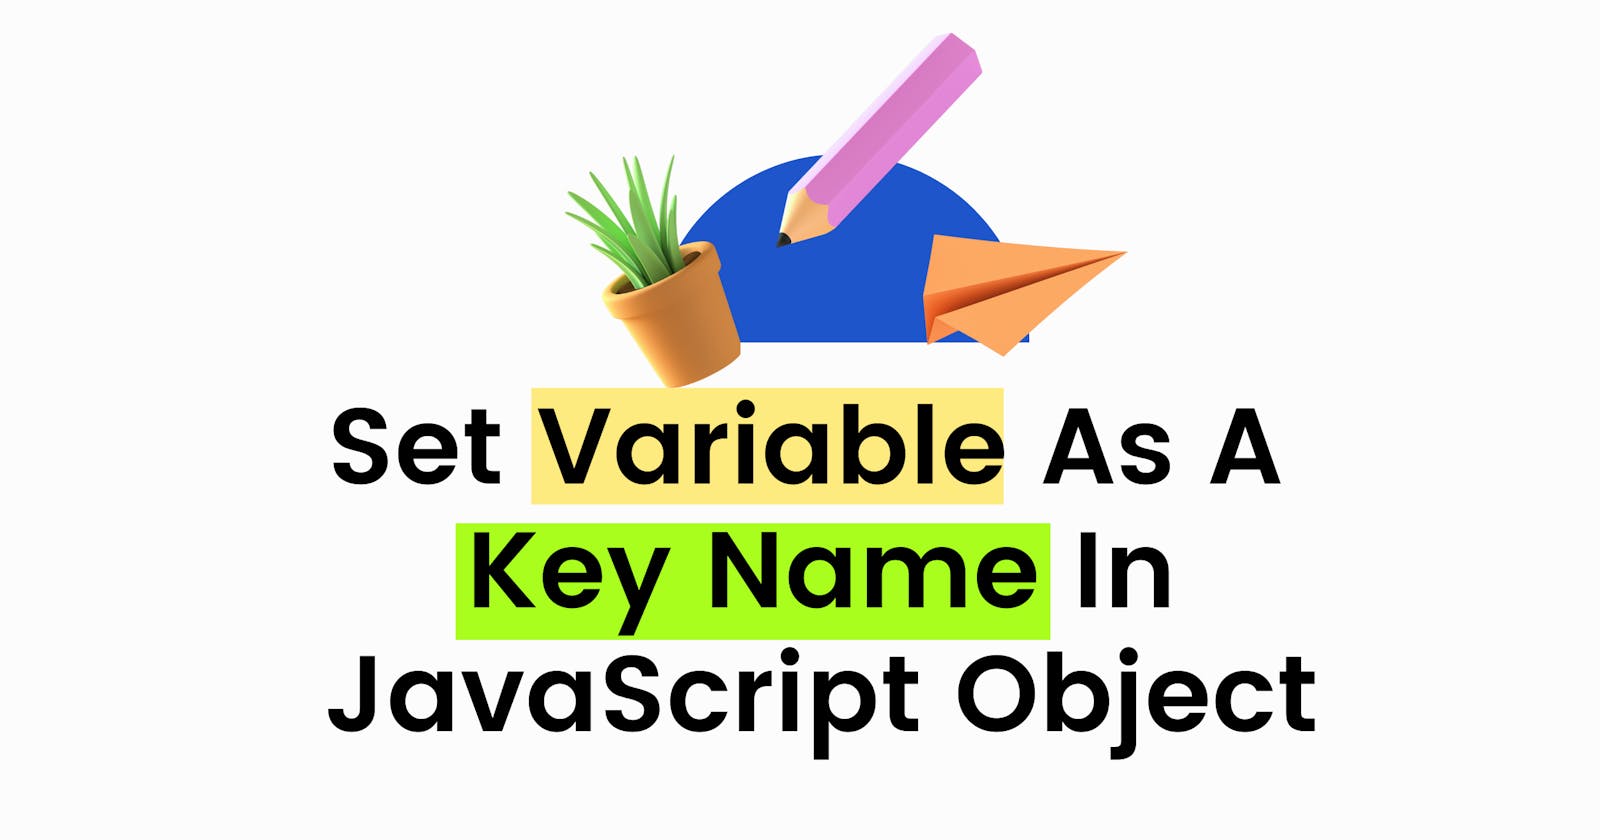 Set Variable As A Key Name In JavaScript Object